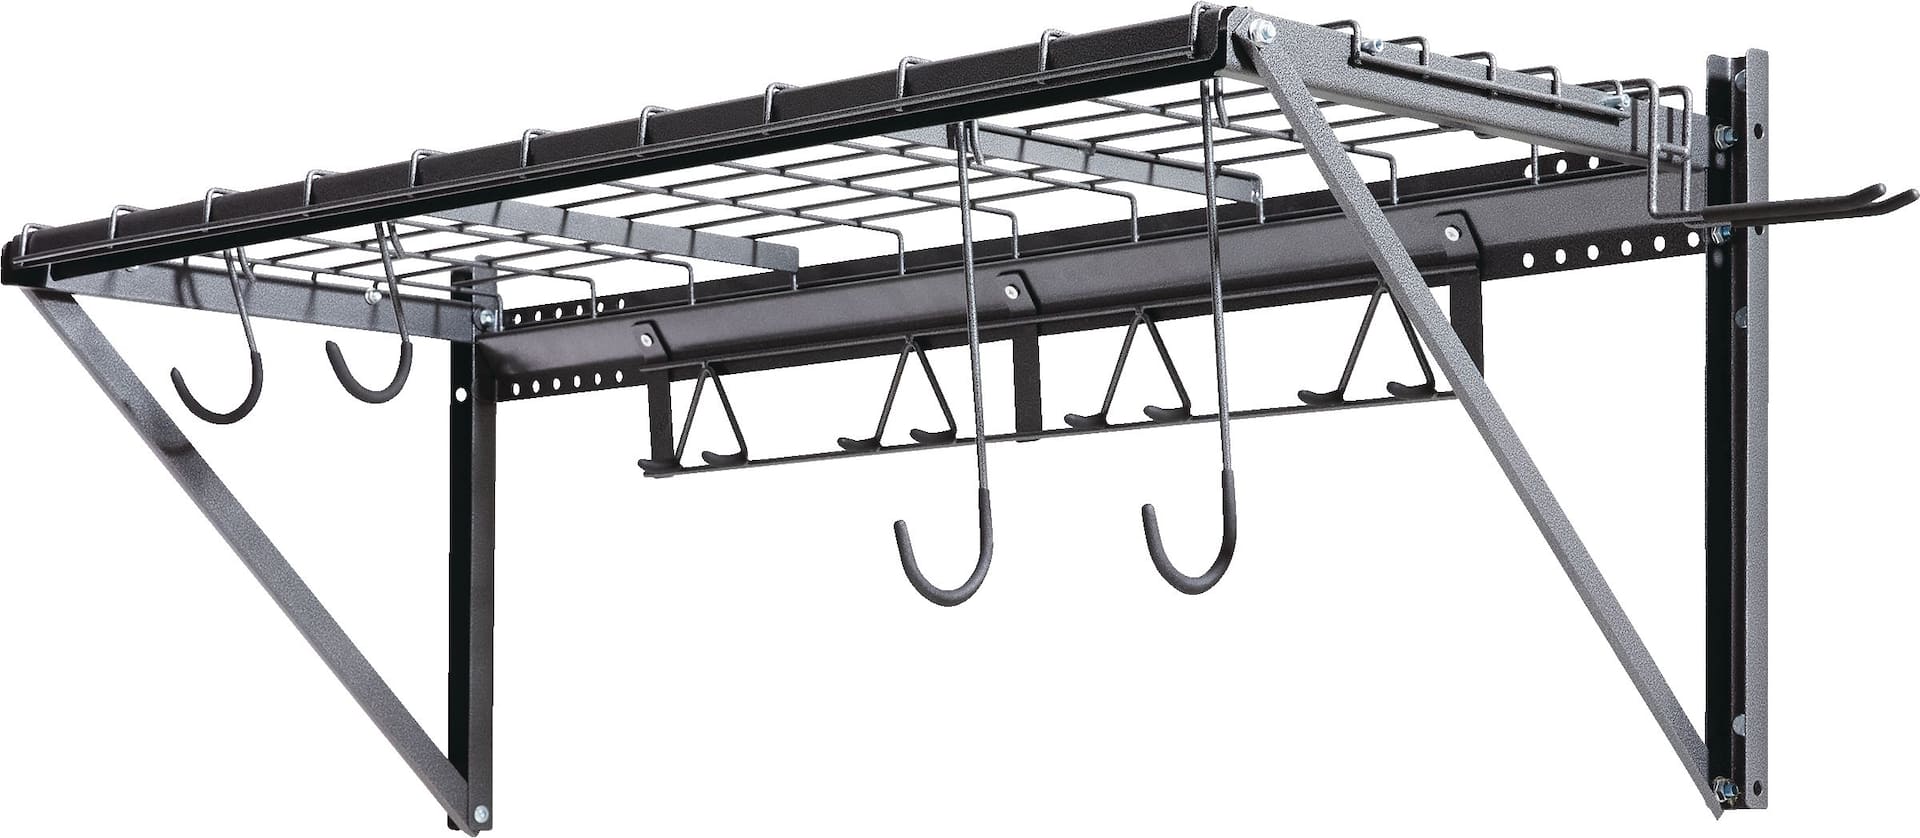 Mastercraft All-in-1 Gear Storage Rack, 48 x 18 x 18-in, Up to 136-kgs